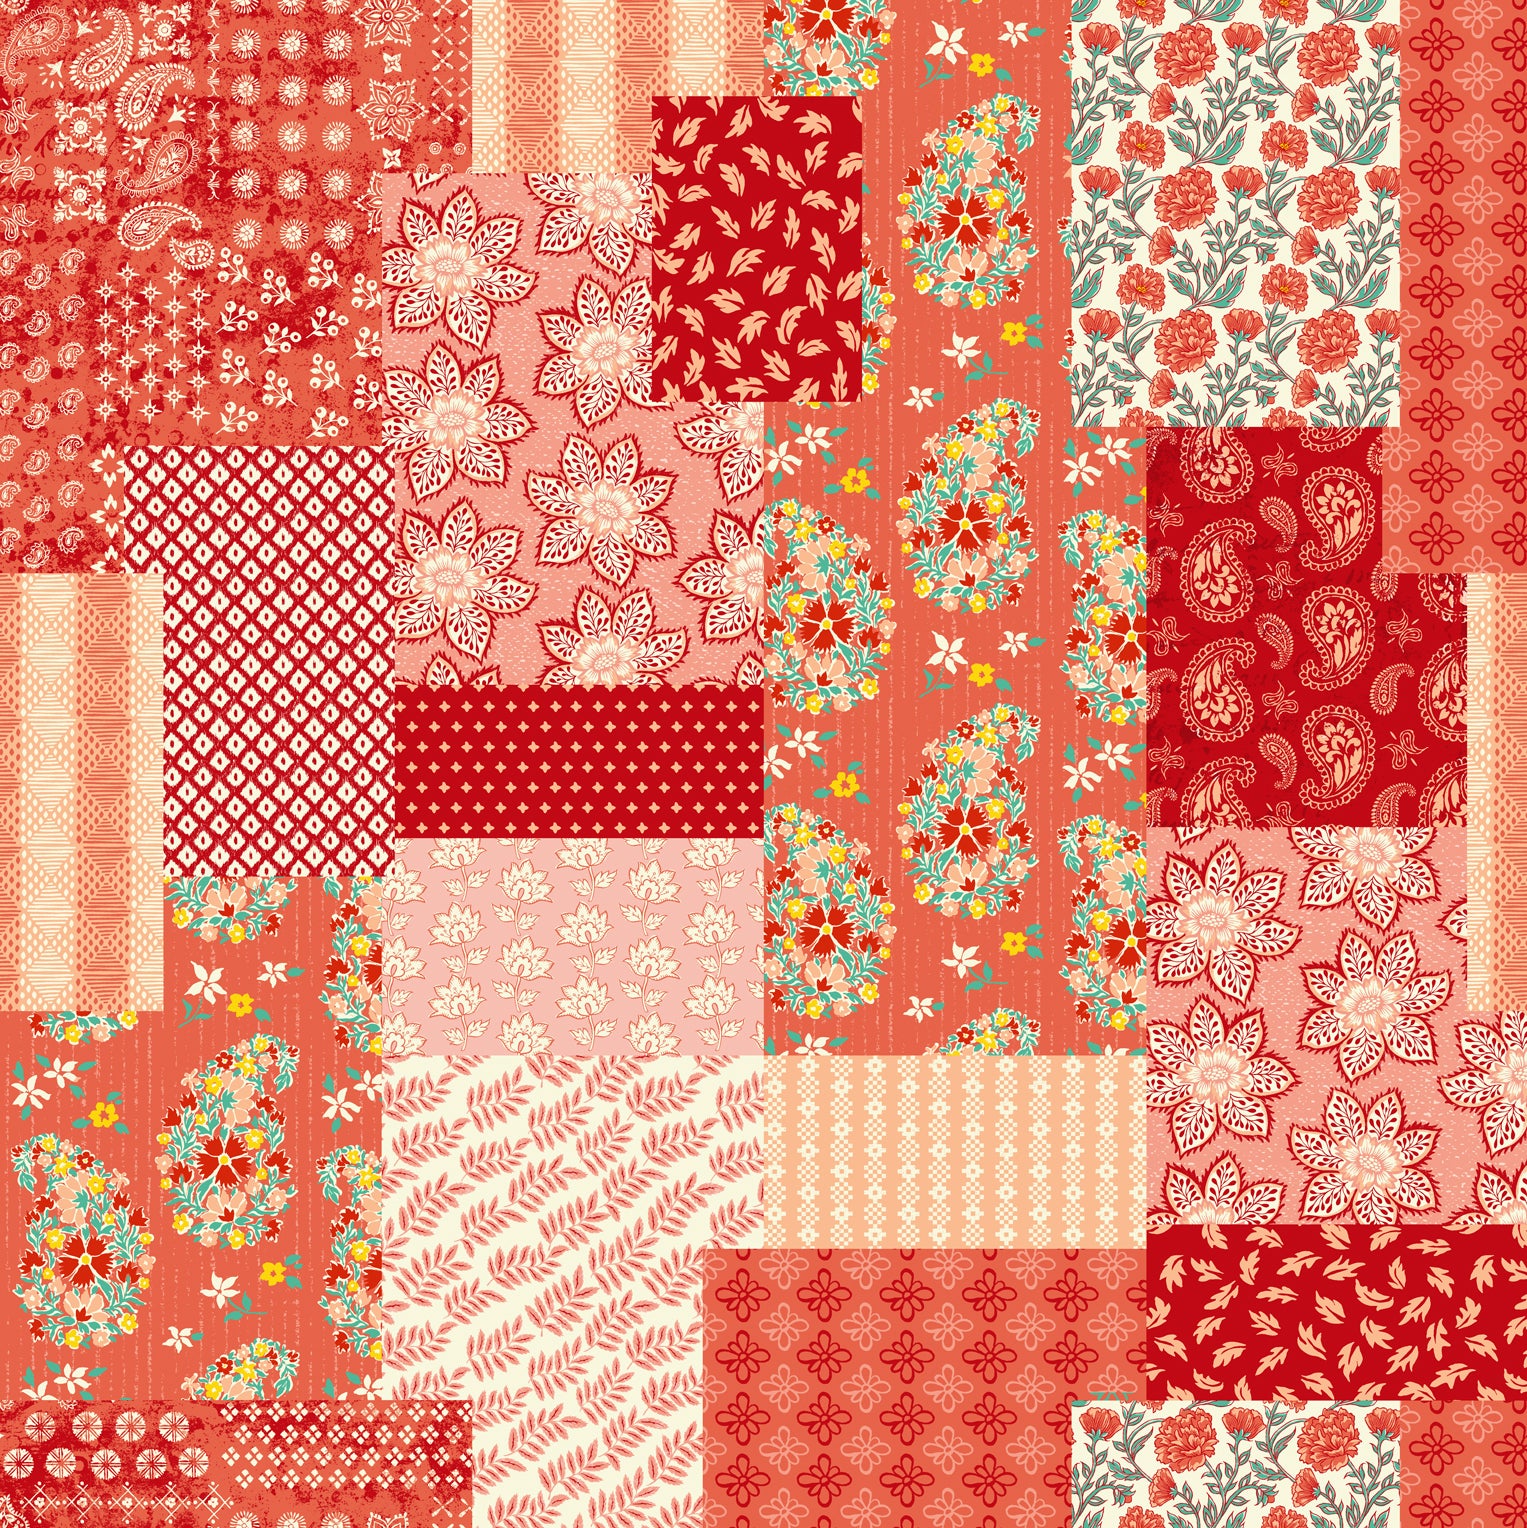 Cadence Quilt Fabric - Patchwork in Persimmon Red/Orange - 11919 11